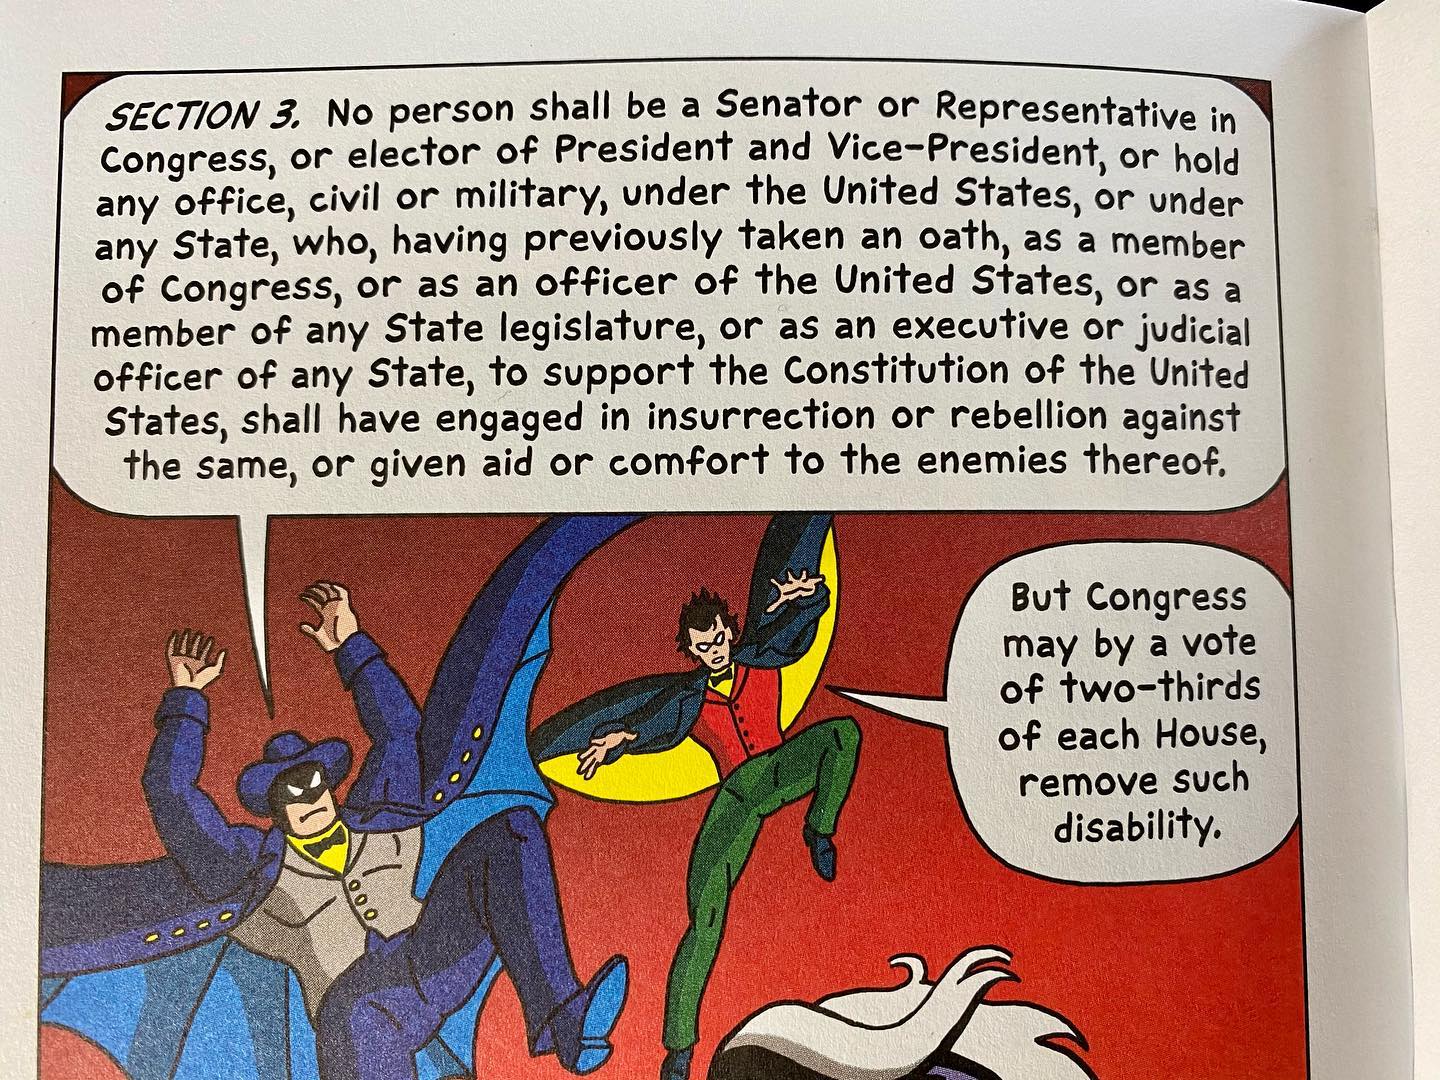 Section 3 of the 14th Amendment disqualifies those who engage in insurrection against the Constitution of the United States from holding office.From Constitution Illustrated by R. Sikoryak.